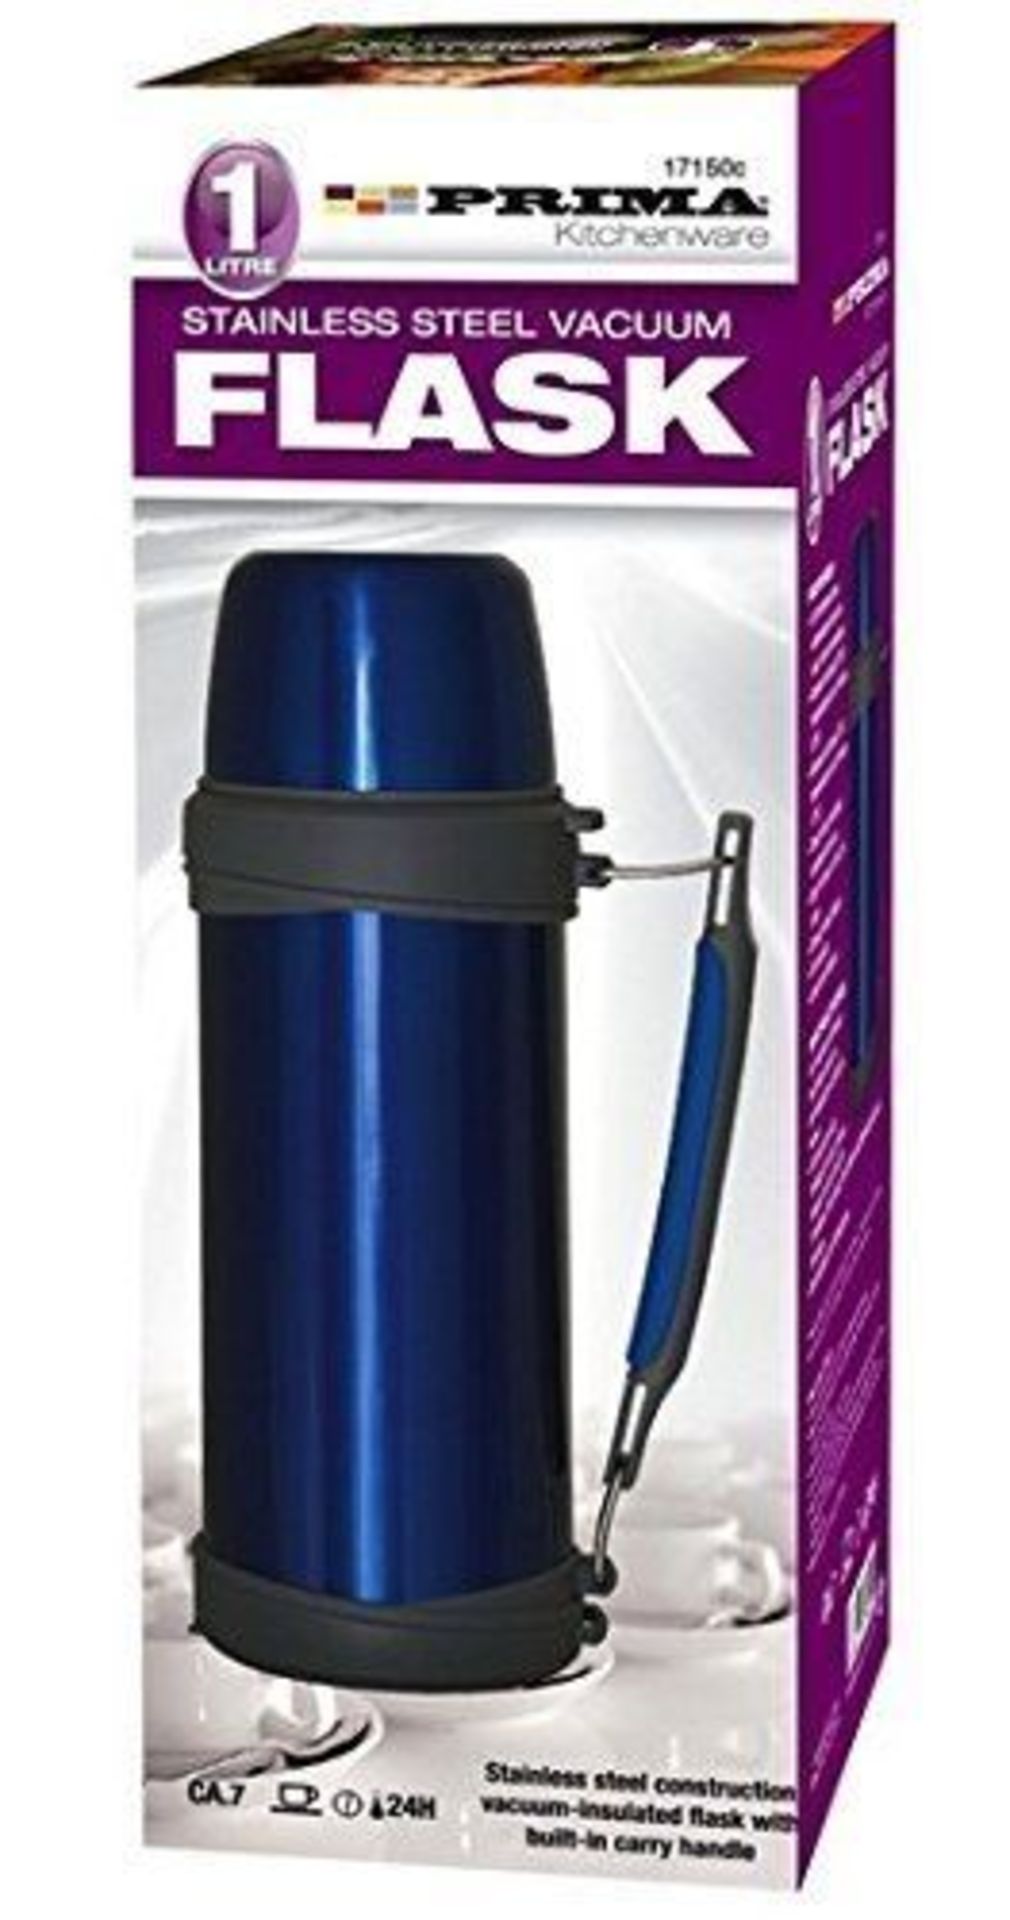 BRAND NEW PRIMA 1L STAINLESS STEEL VACCUM FLASK